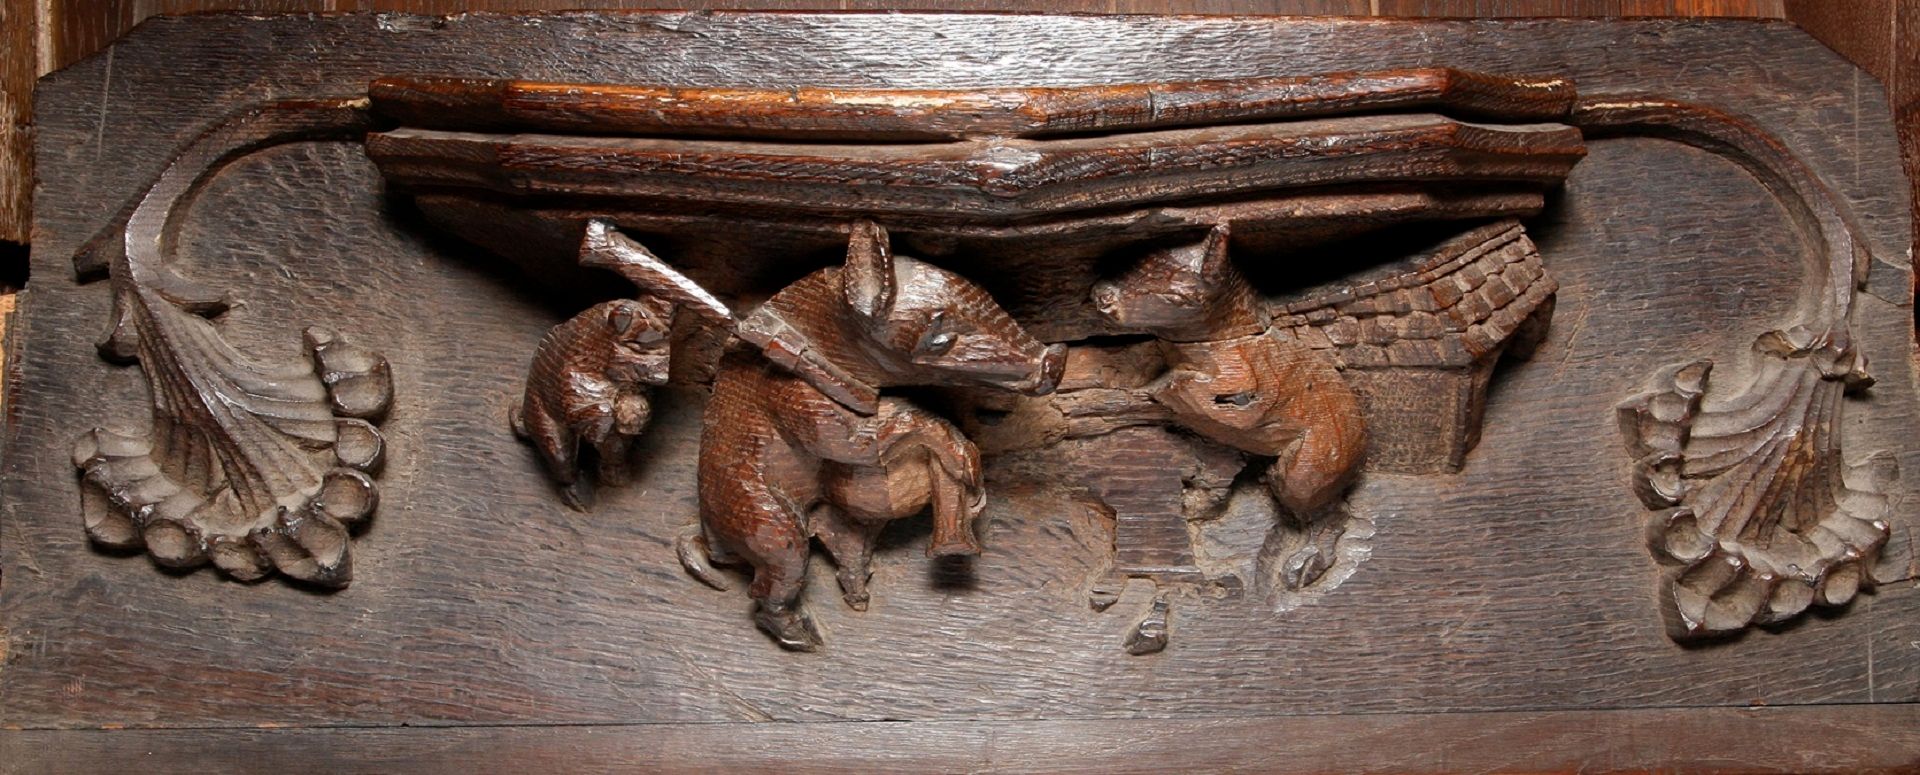 Misericord or mercy seat from the Tunstall Chapel featuring a pig playing the Northumbrian pipes.